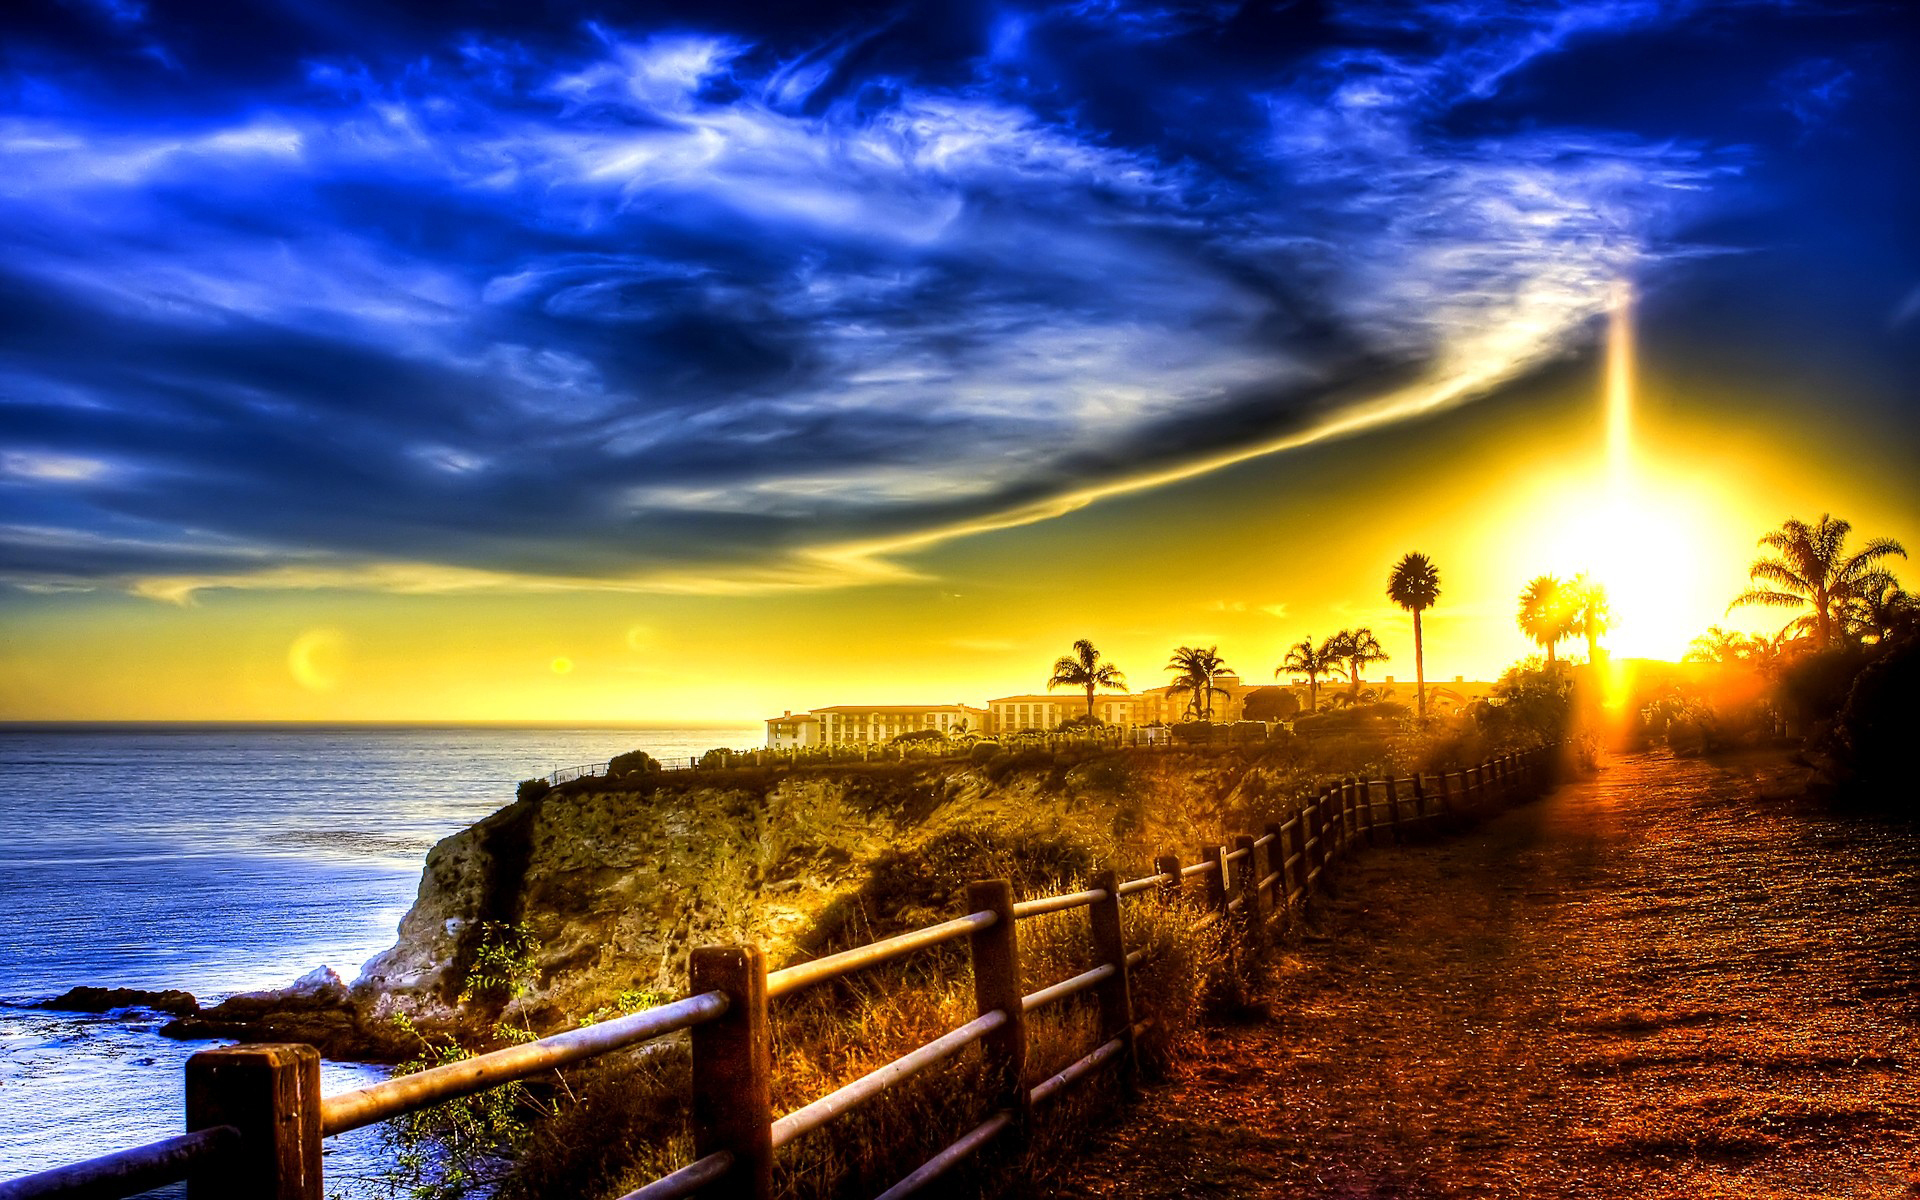 hdr, Roads, Pathways, Skies, Clouds, Oceans, Sea, Water, Sunsets